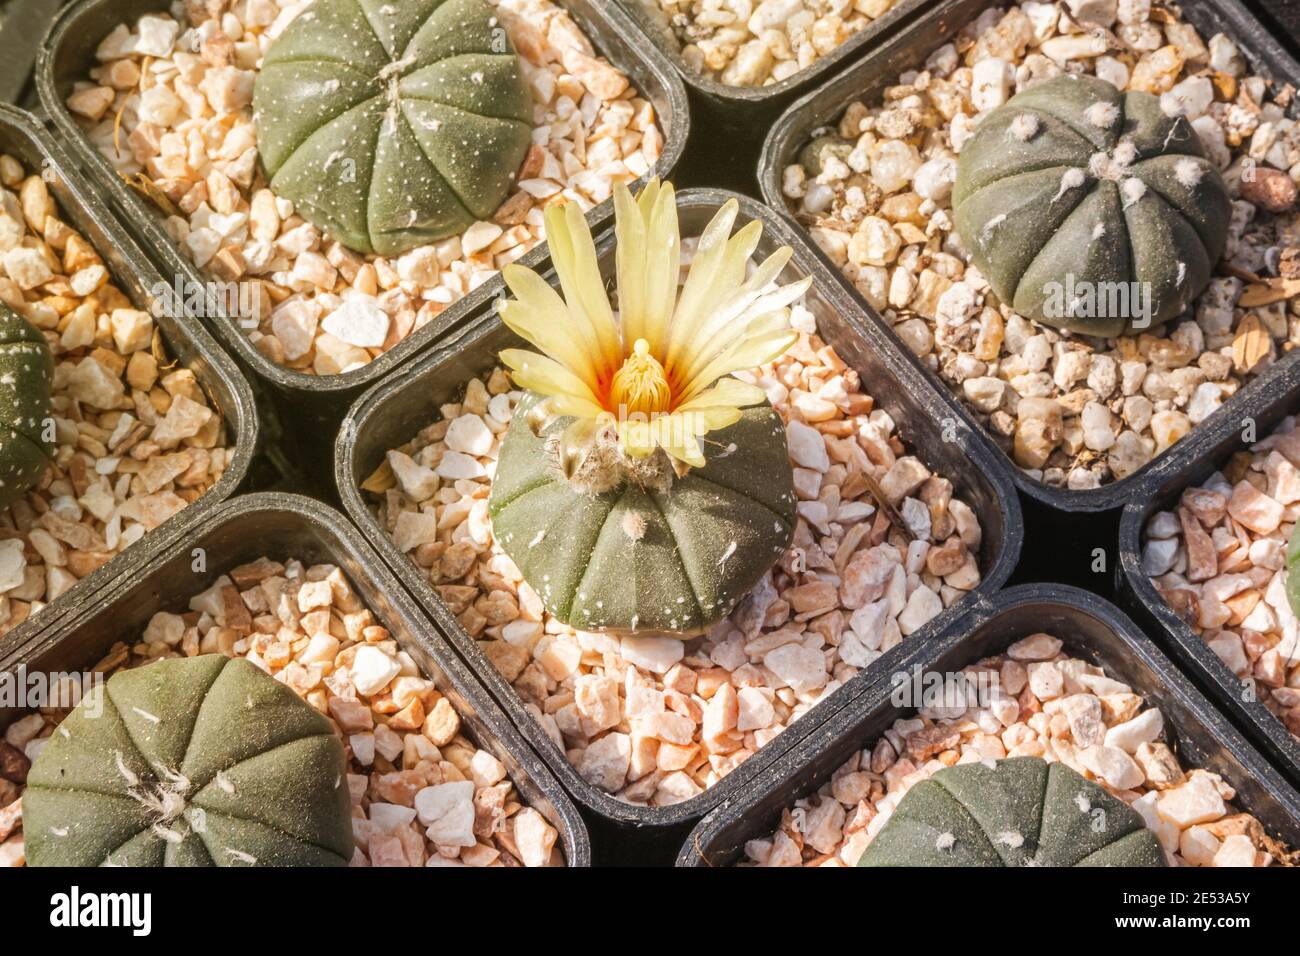 Cactus flowers, Astrophytum asterias with yellow flower is blooming on pot, Succulent, Cacti, Cactaceae, Tree, Drought tolerant plant. Stock Photo